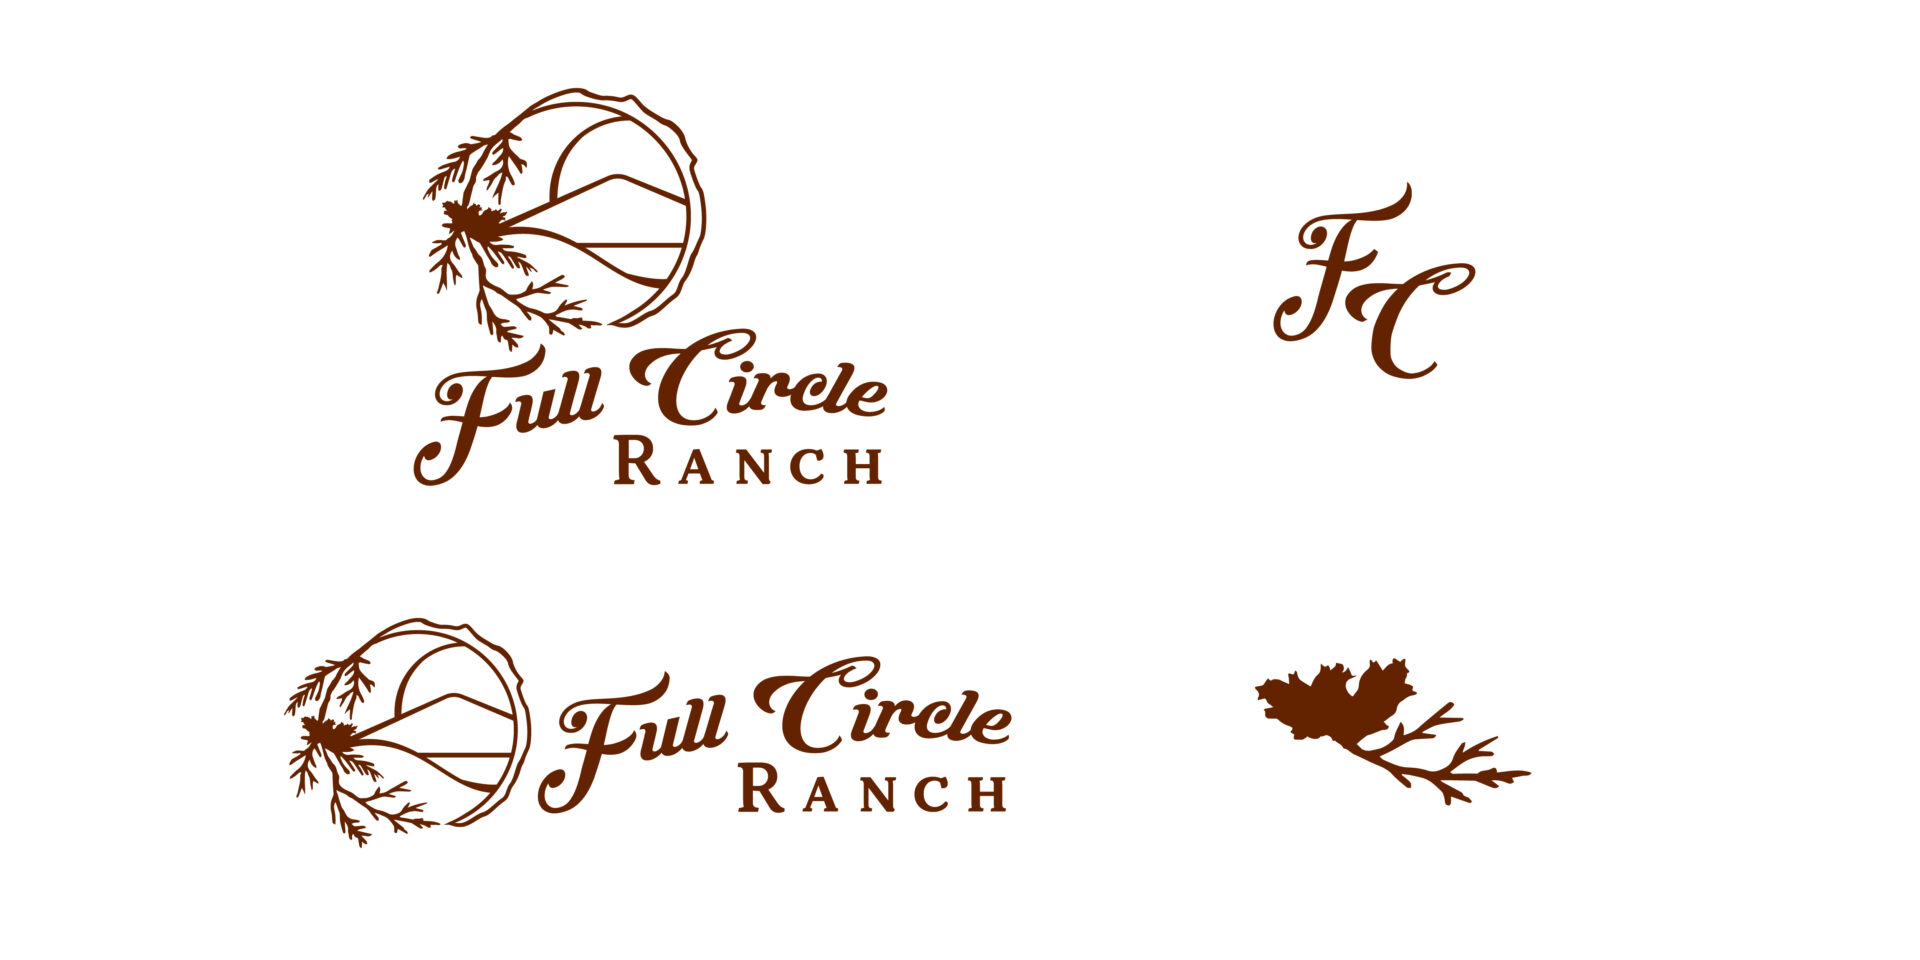 Full Circle Ranch responsive logo set for many use cases